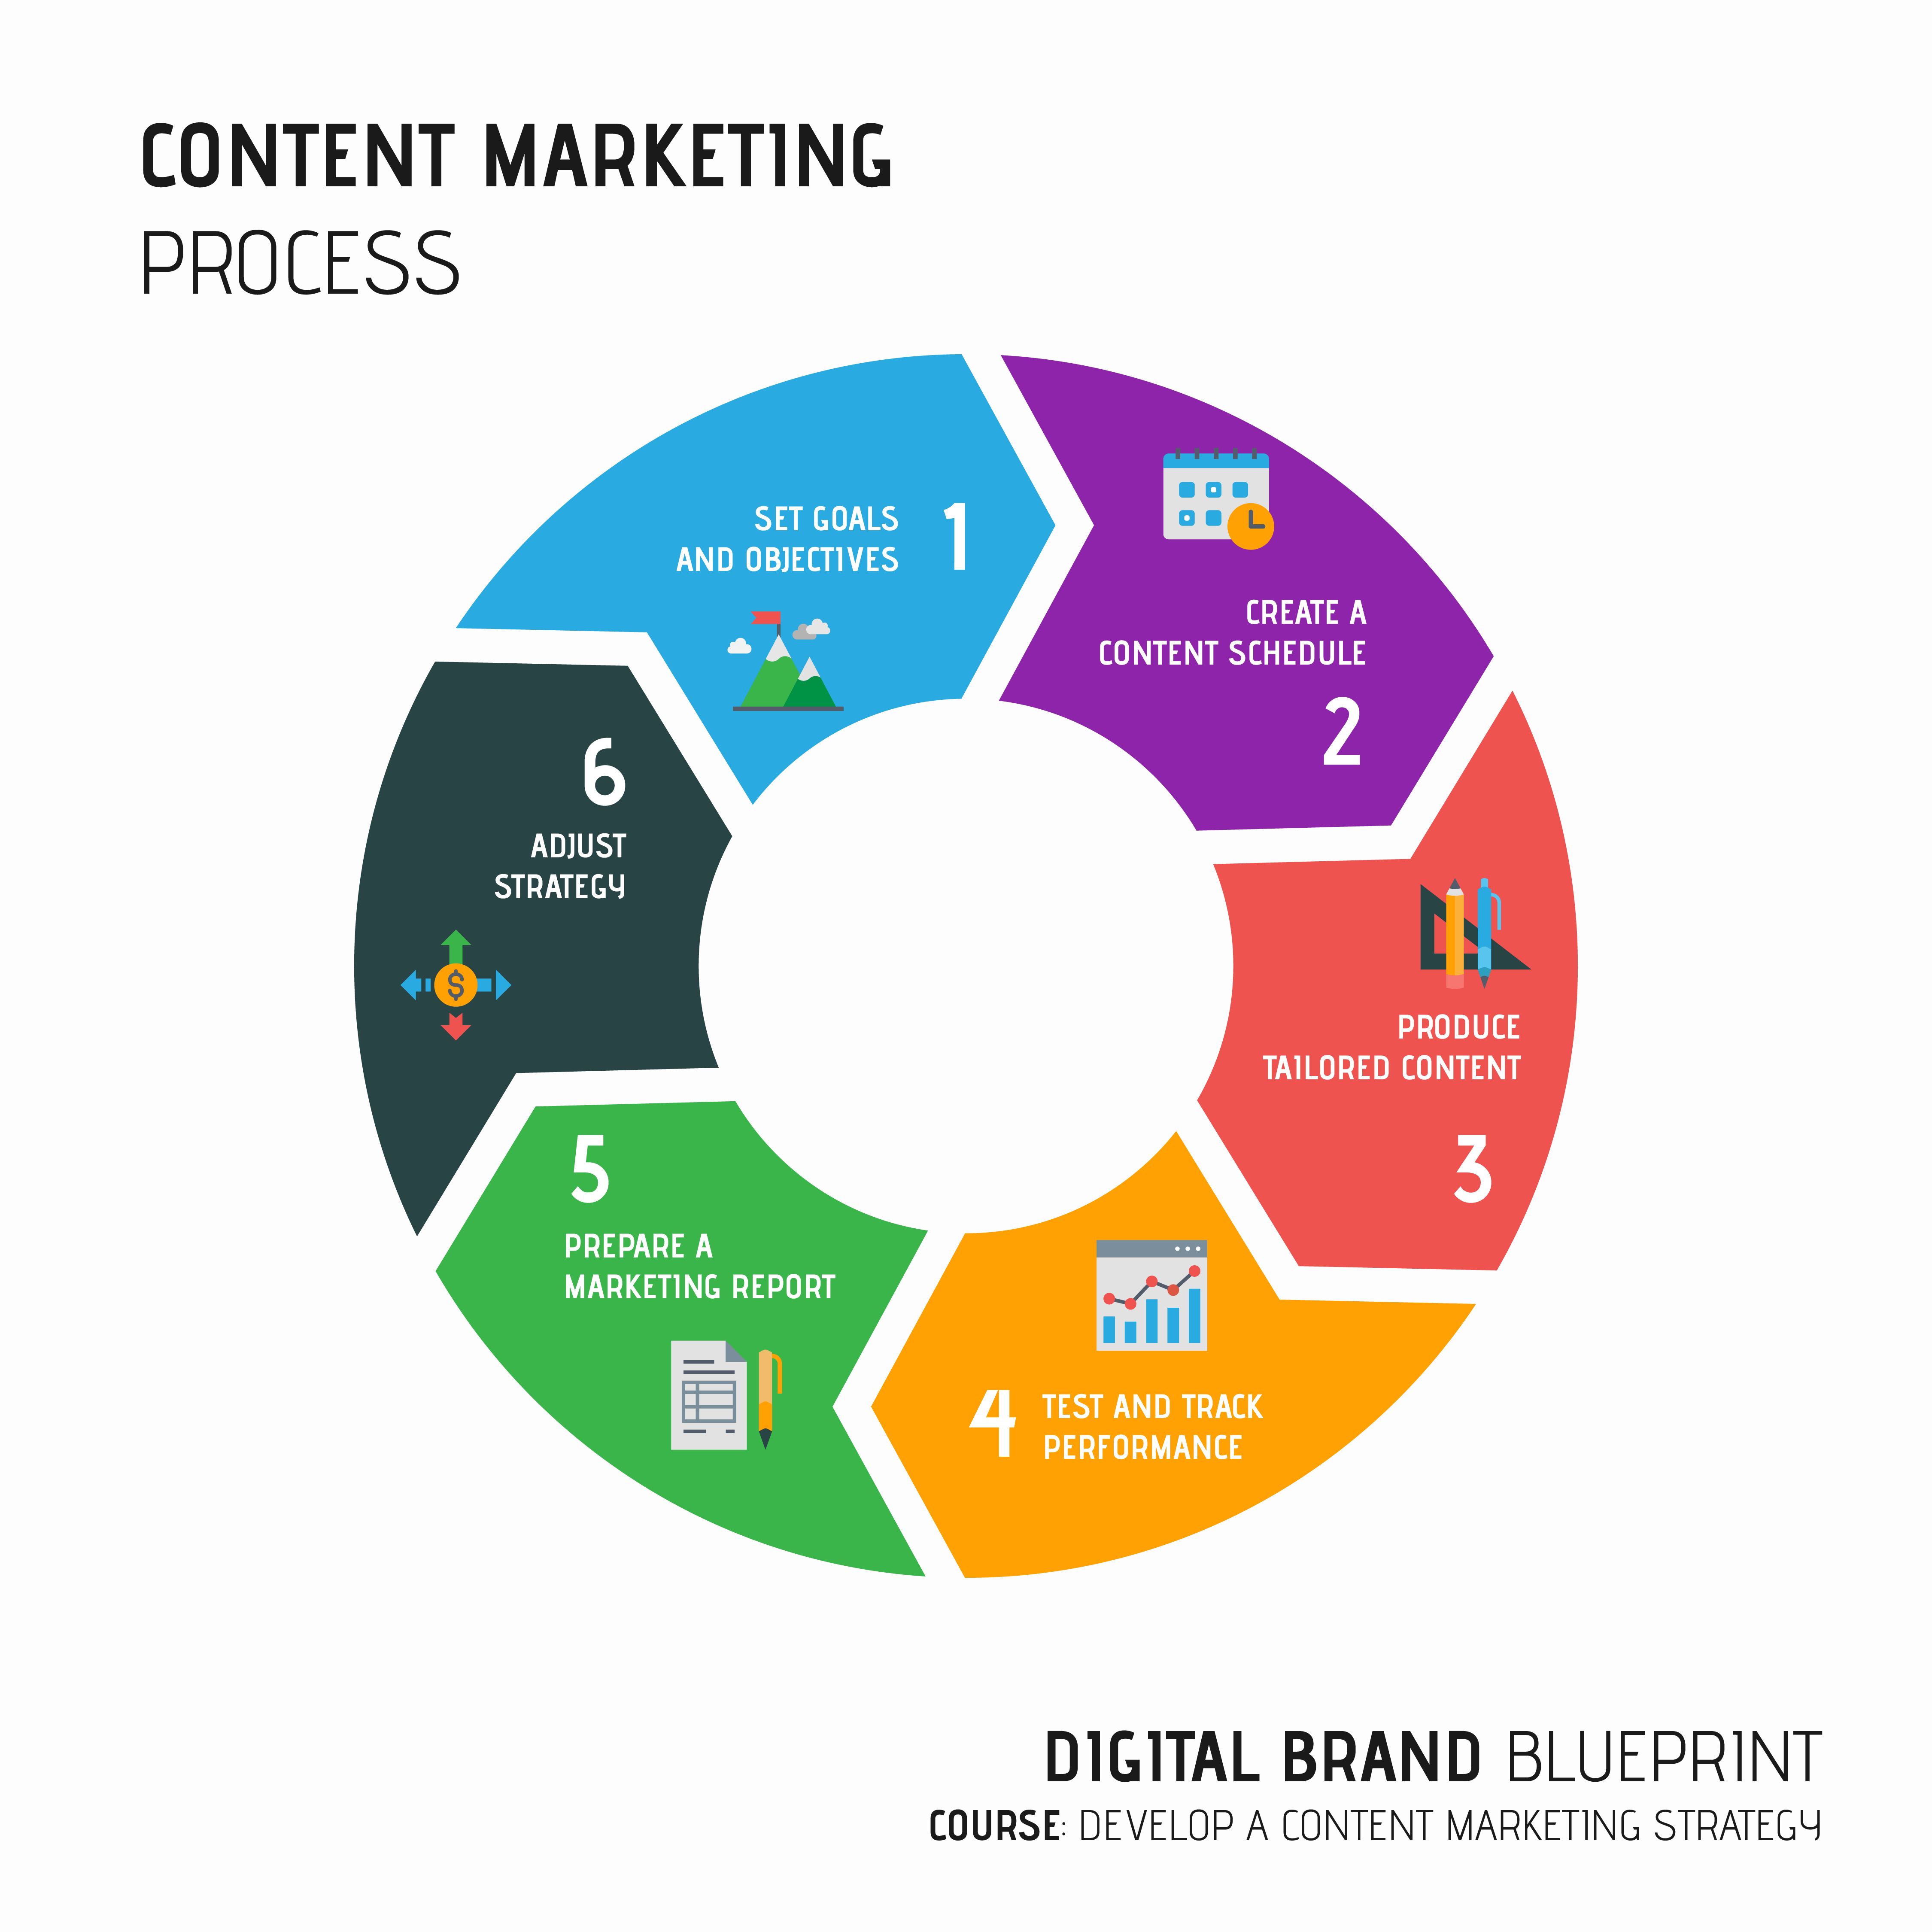 Content Marketing Strategy Photo Of 6 Steps With Circular Flow Infographic Chart.